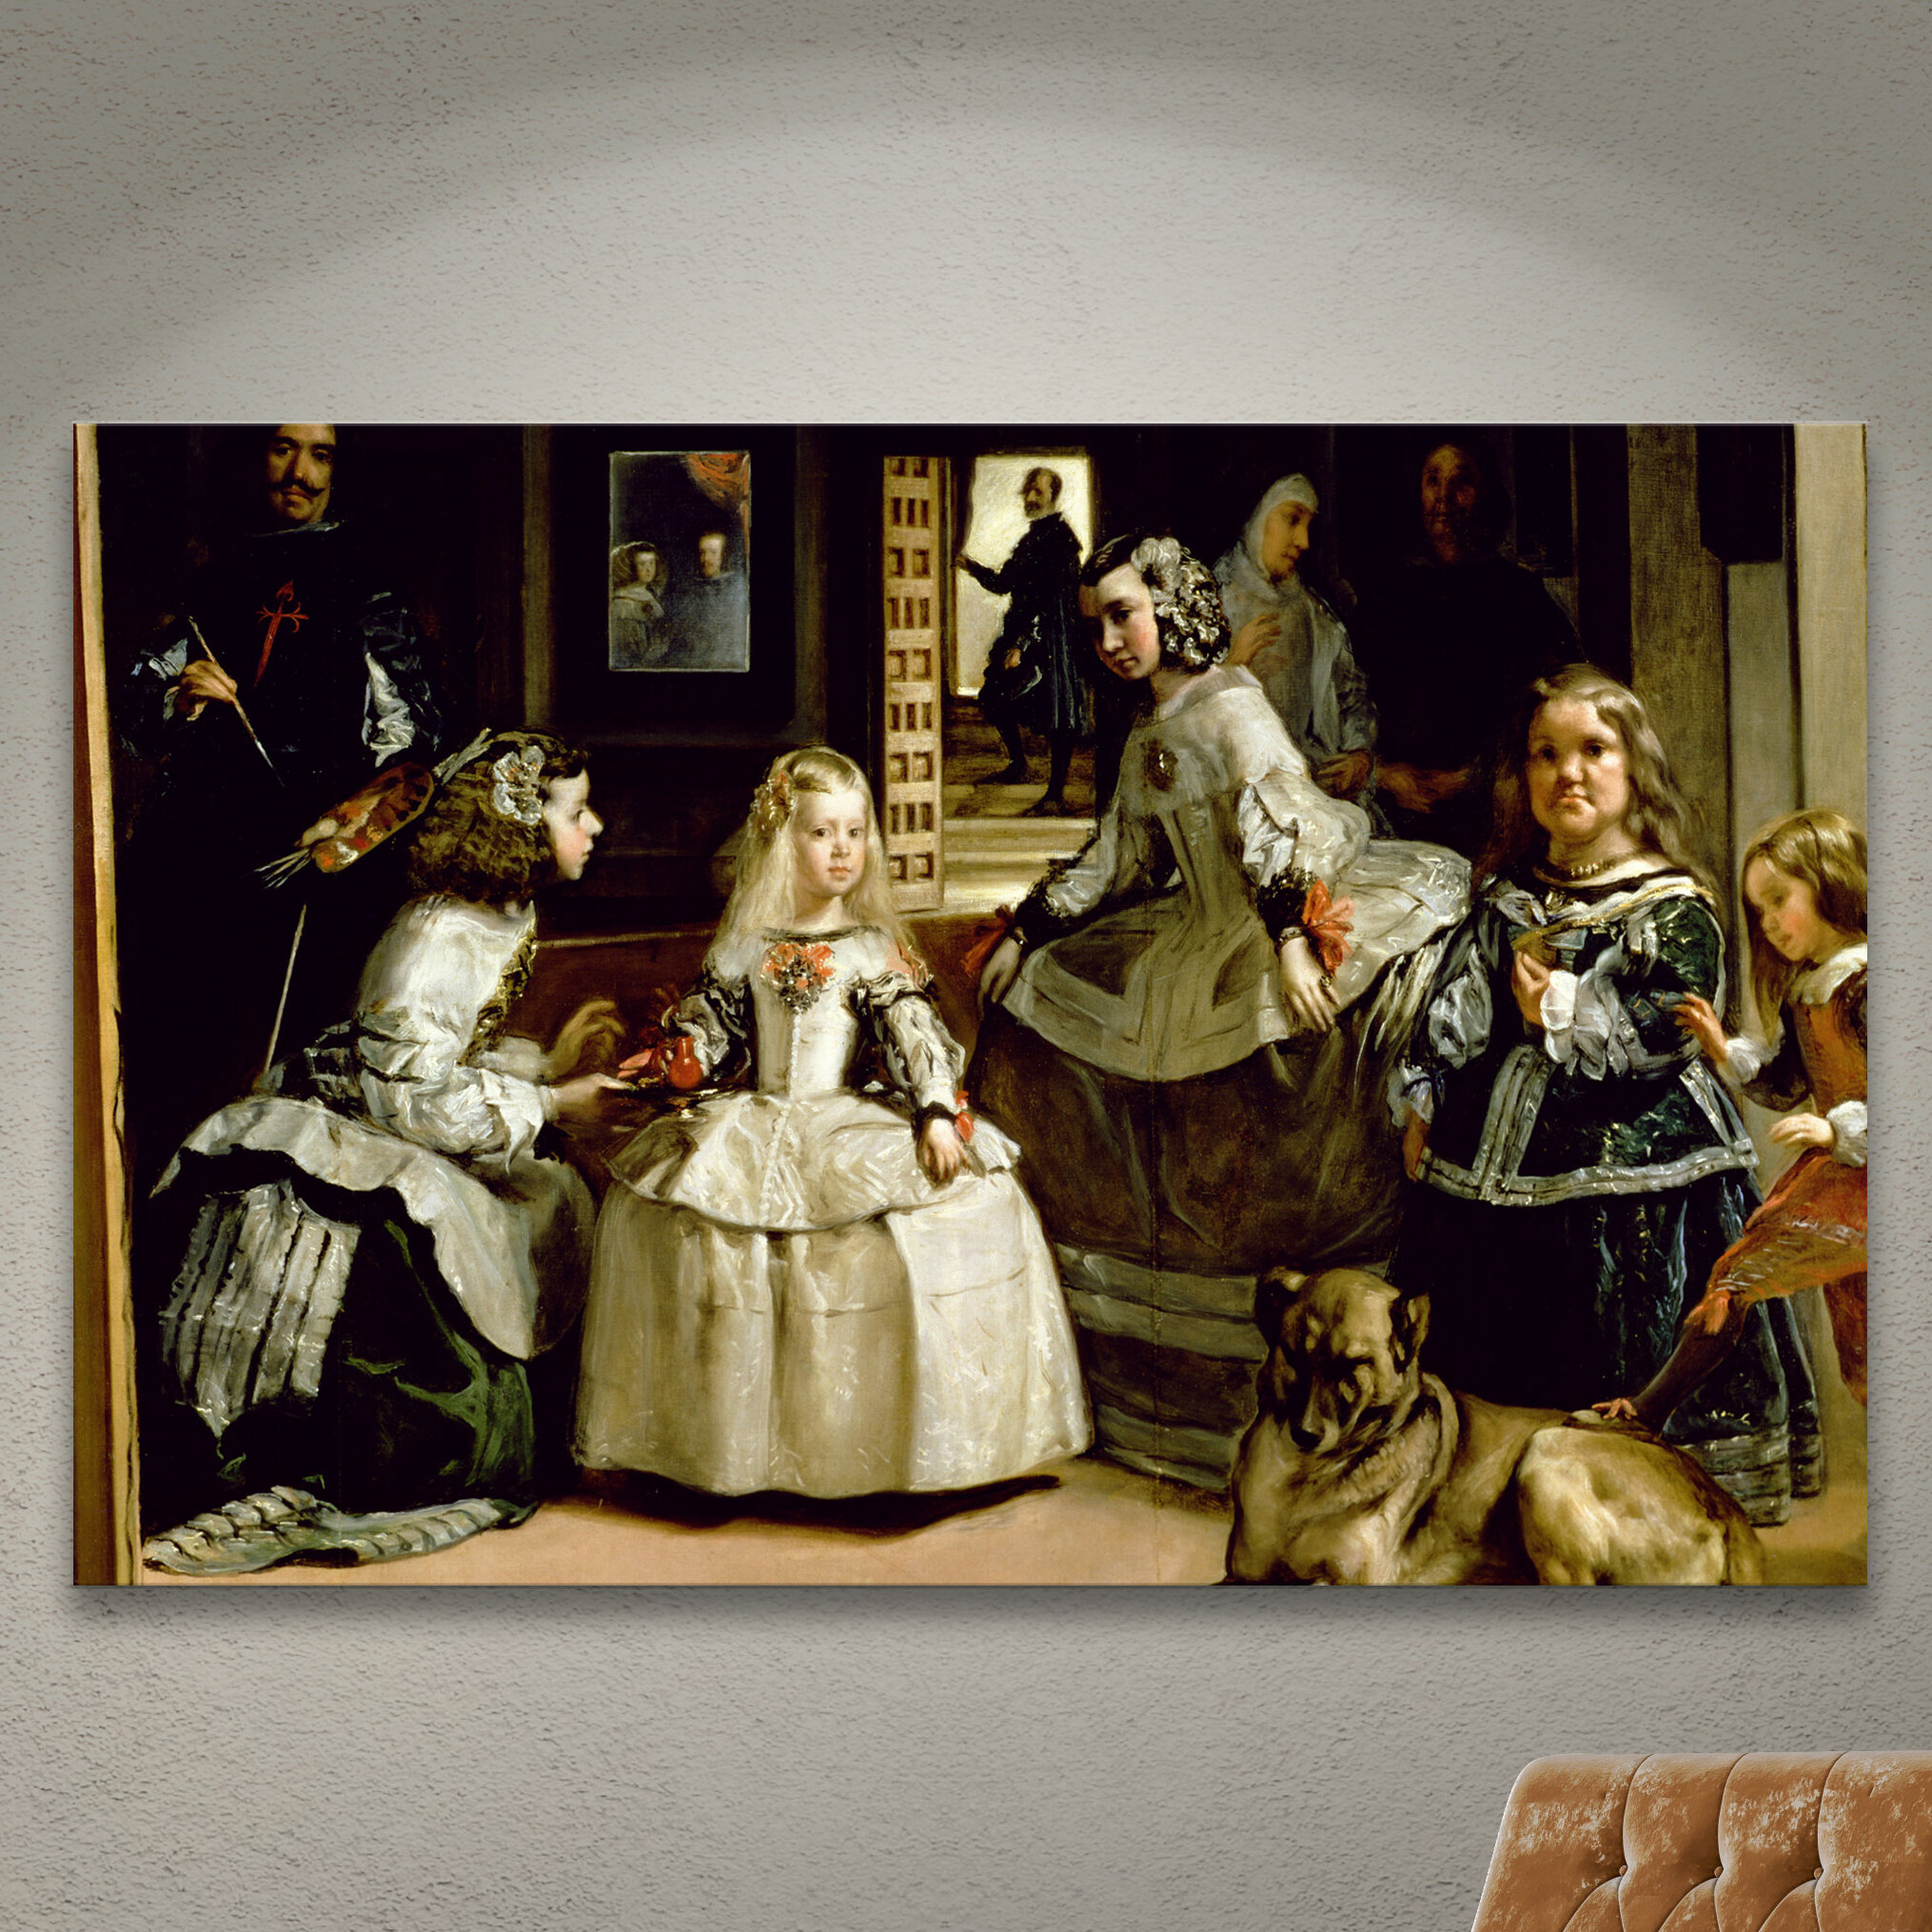 Las Meninas by Diego Velázquez: 10 Things to Know